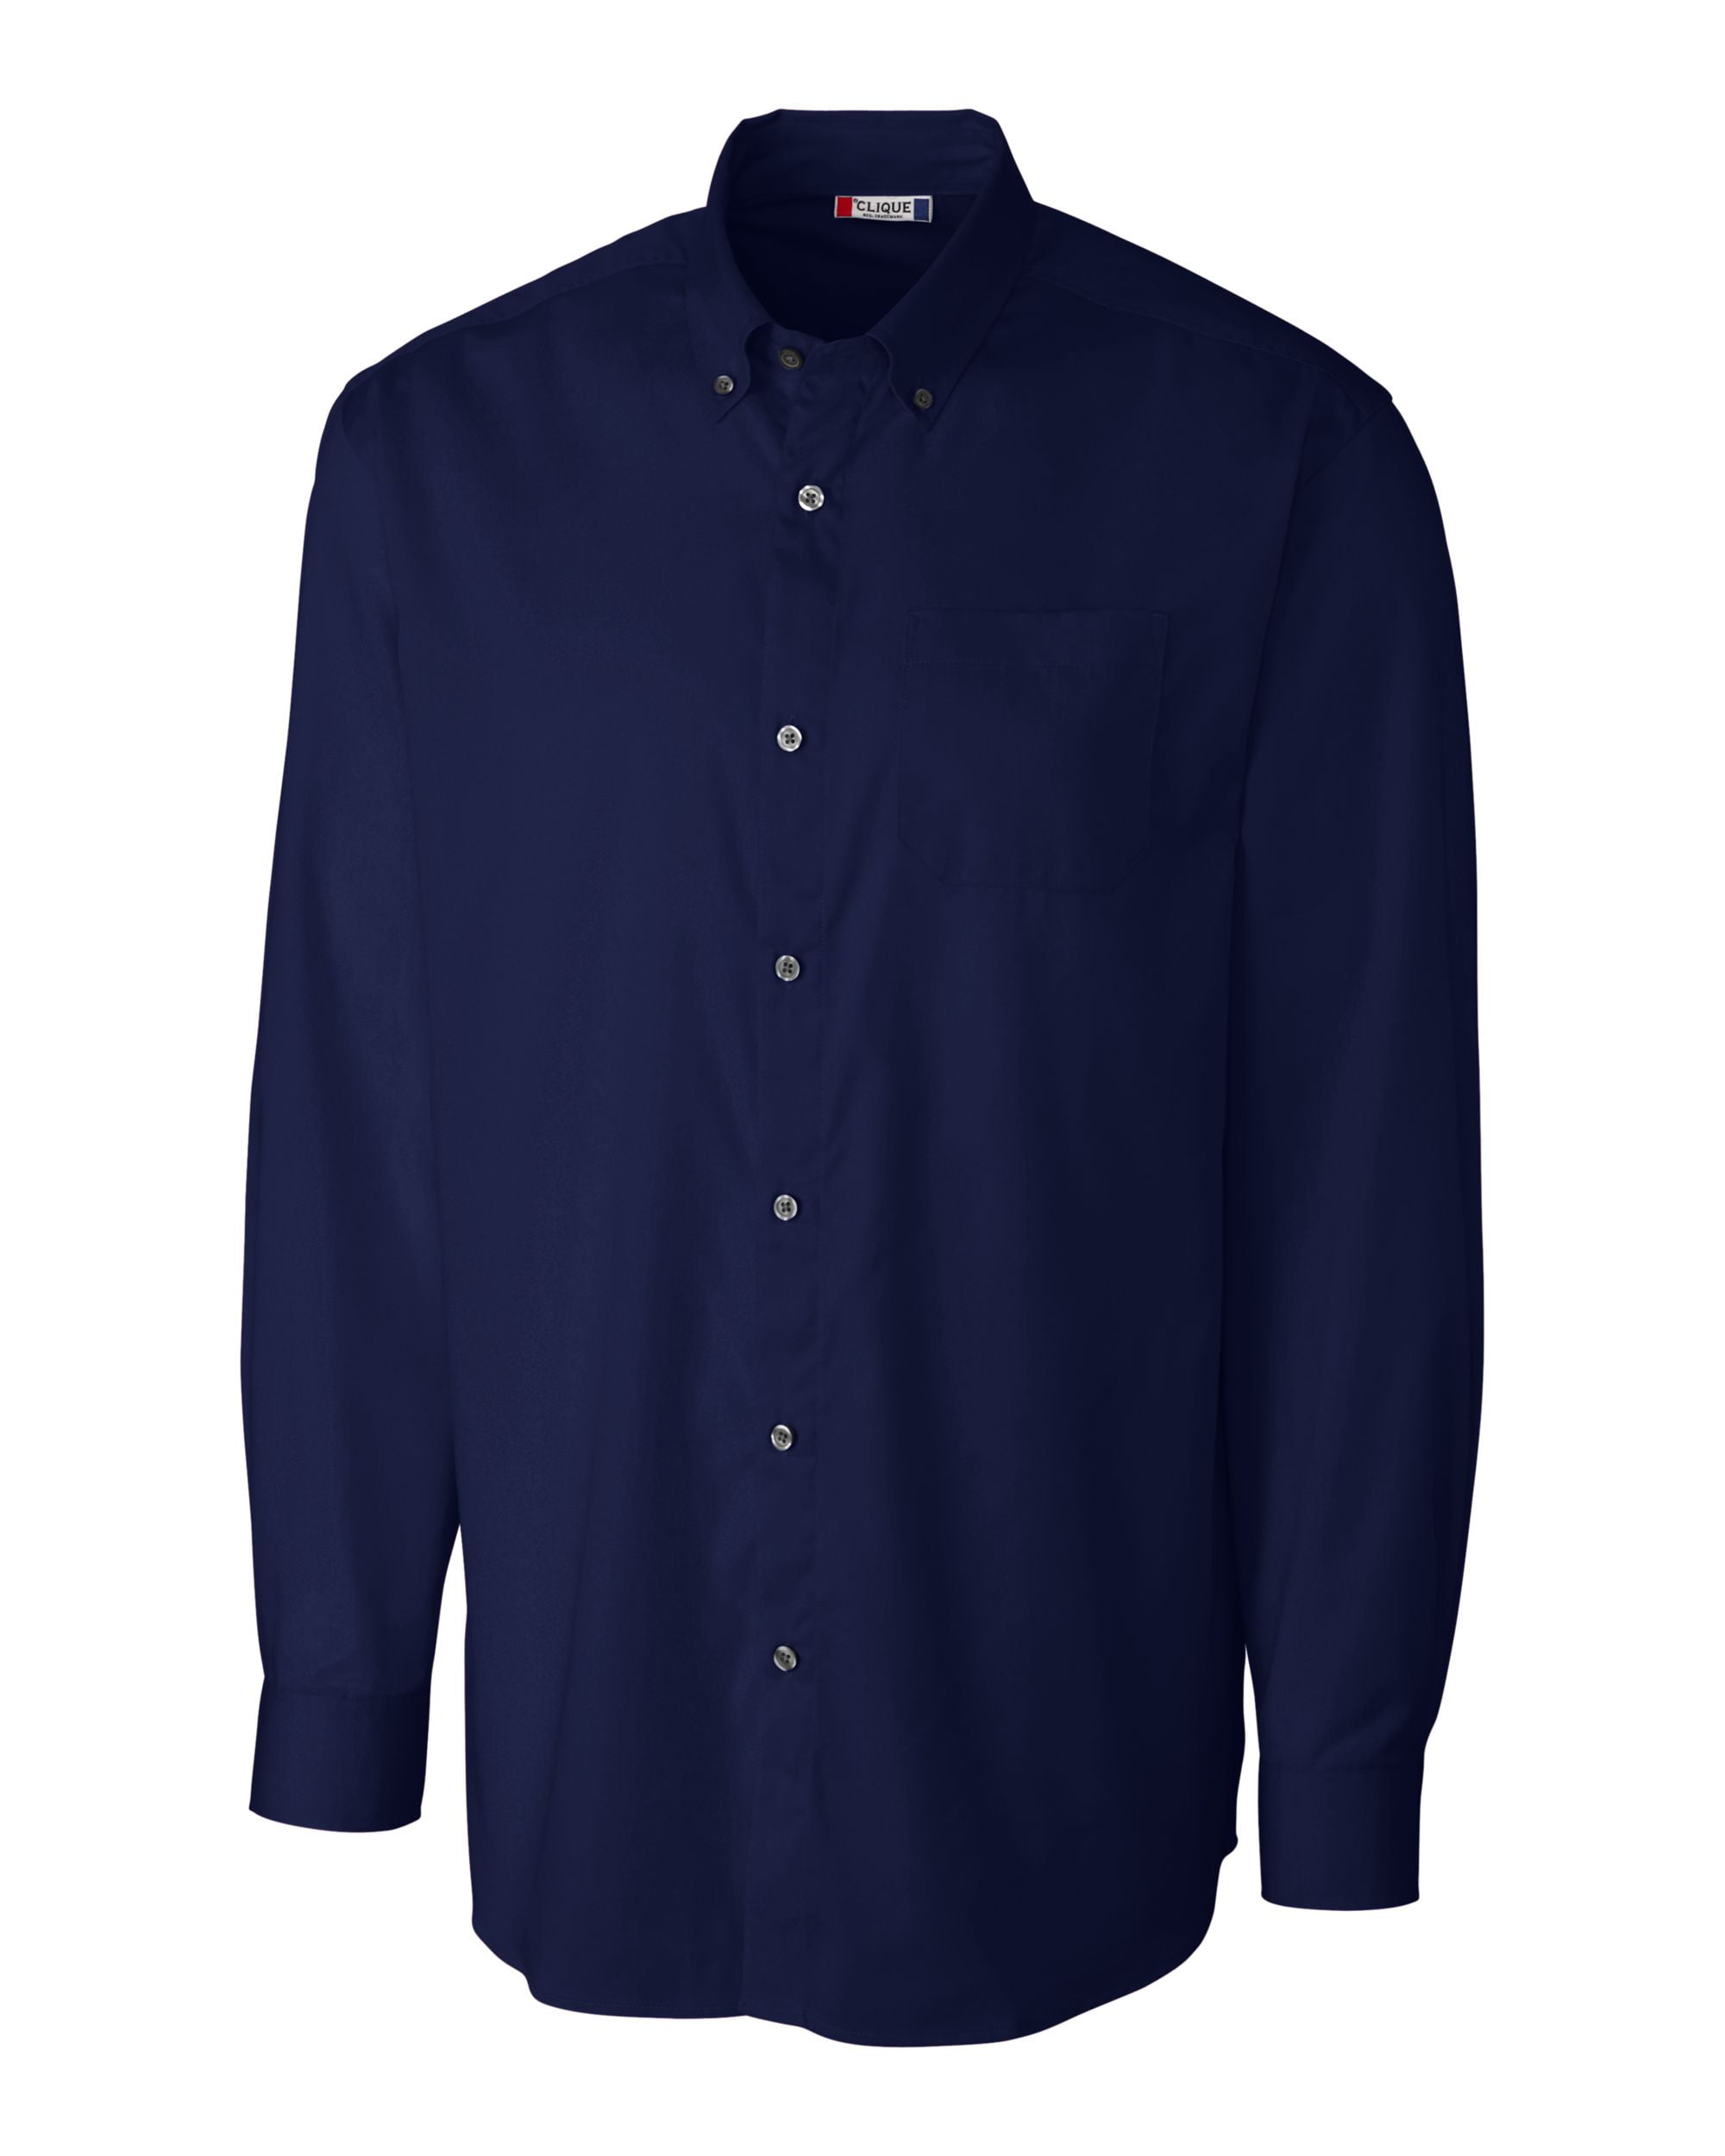 Clique Mens Long-Sleeve Avesta Stain Resistant Twill Shirt 